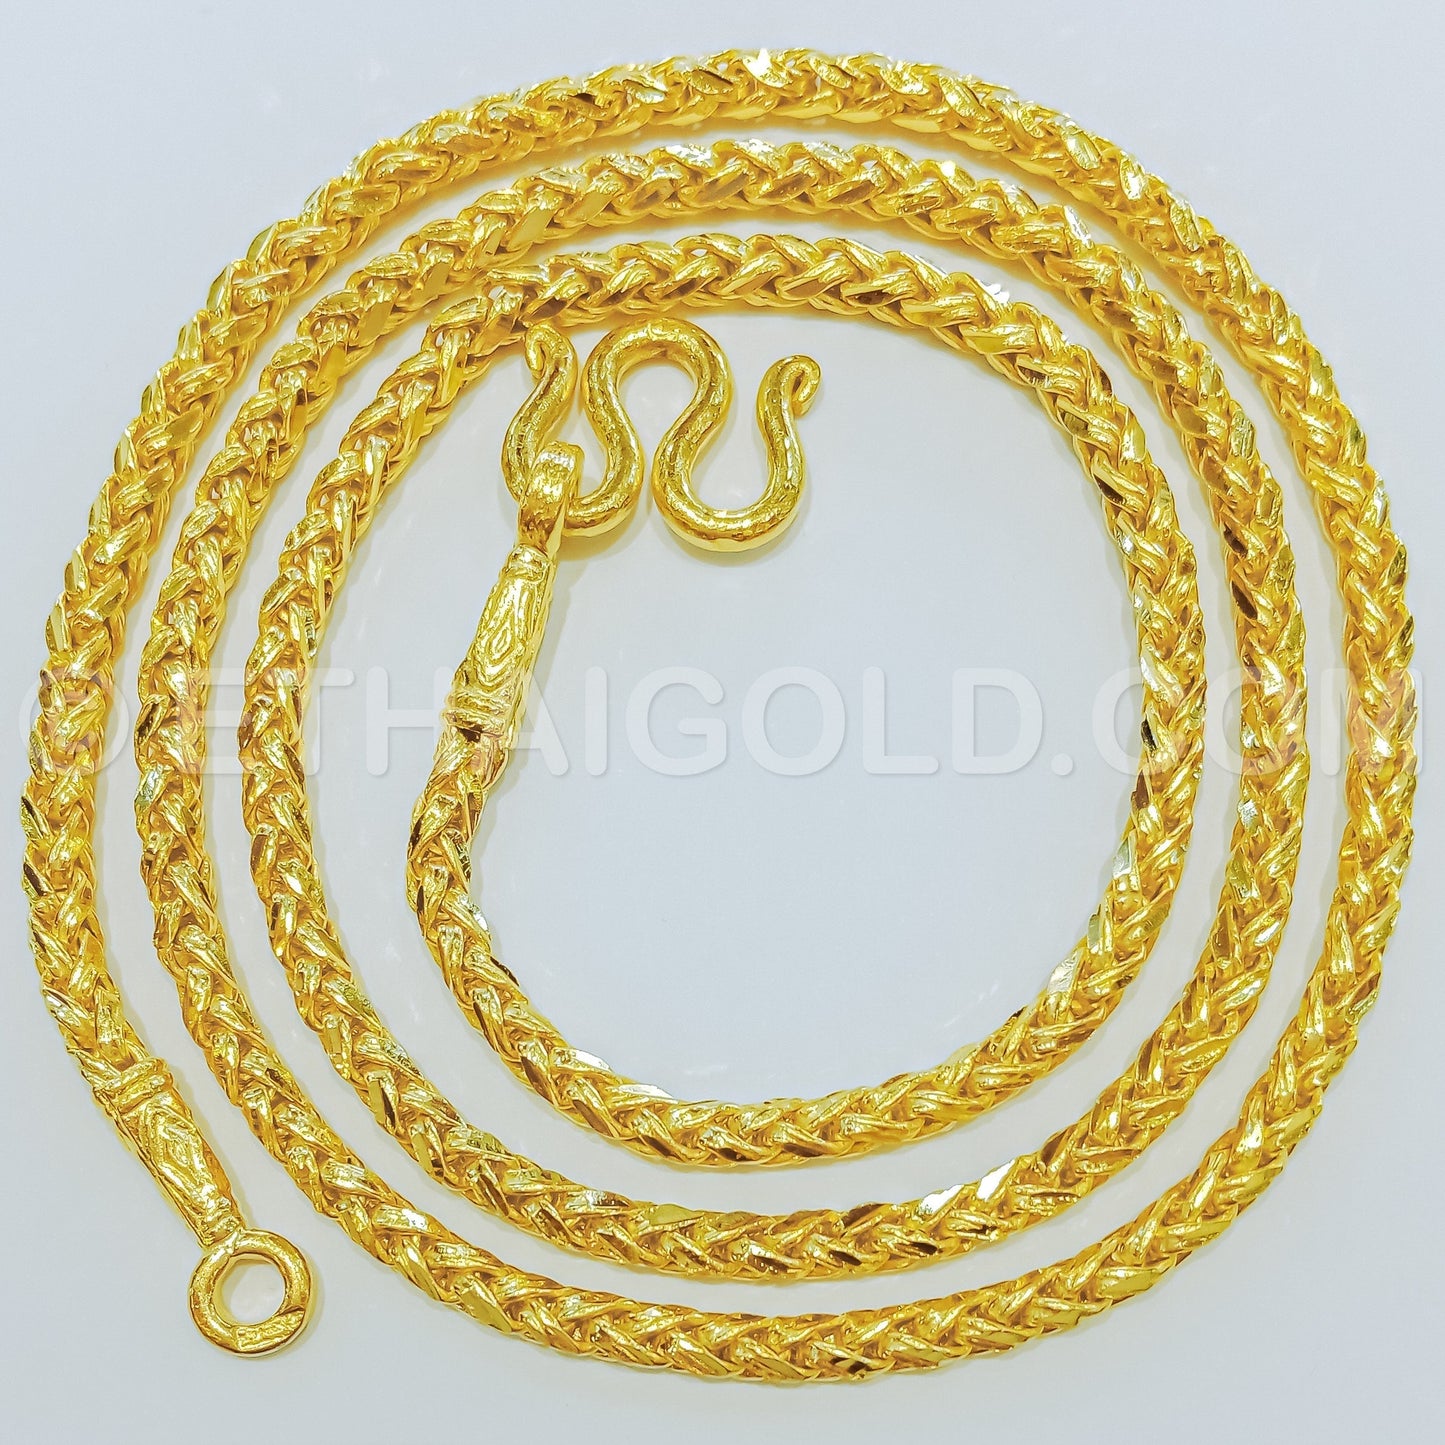 5 BAHT POLISHED DIAMOND-CUT SOLID PALMA CHAIN NECKLACE IN 23K GOLD (ID: N1505B)